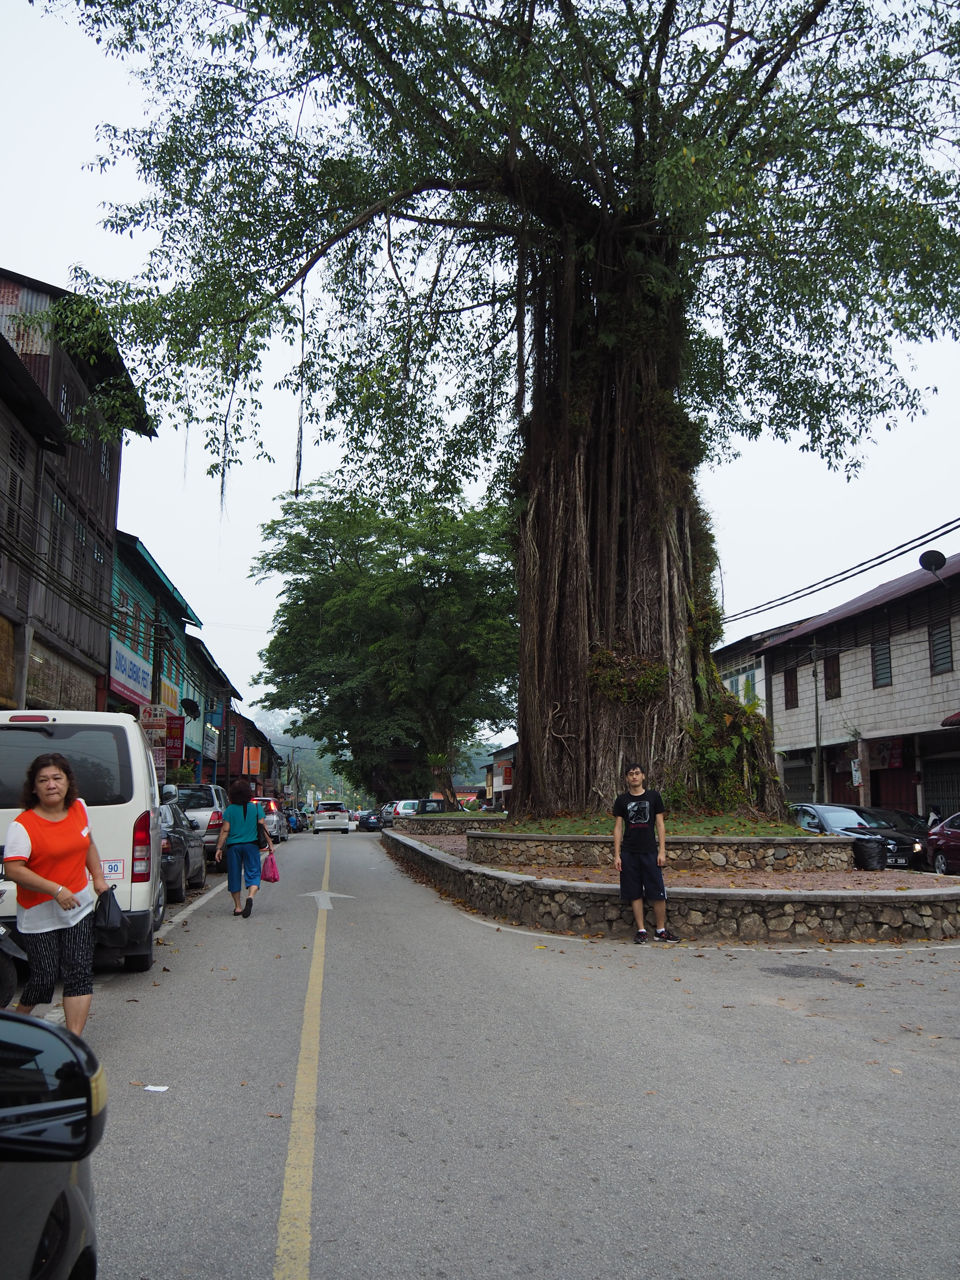 One of the big trees in Sungai Lembing town